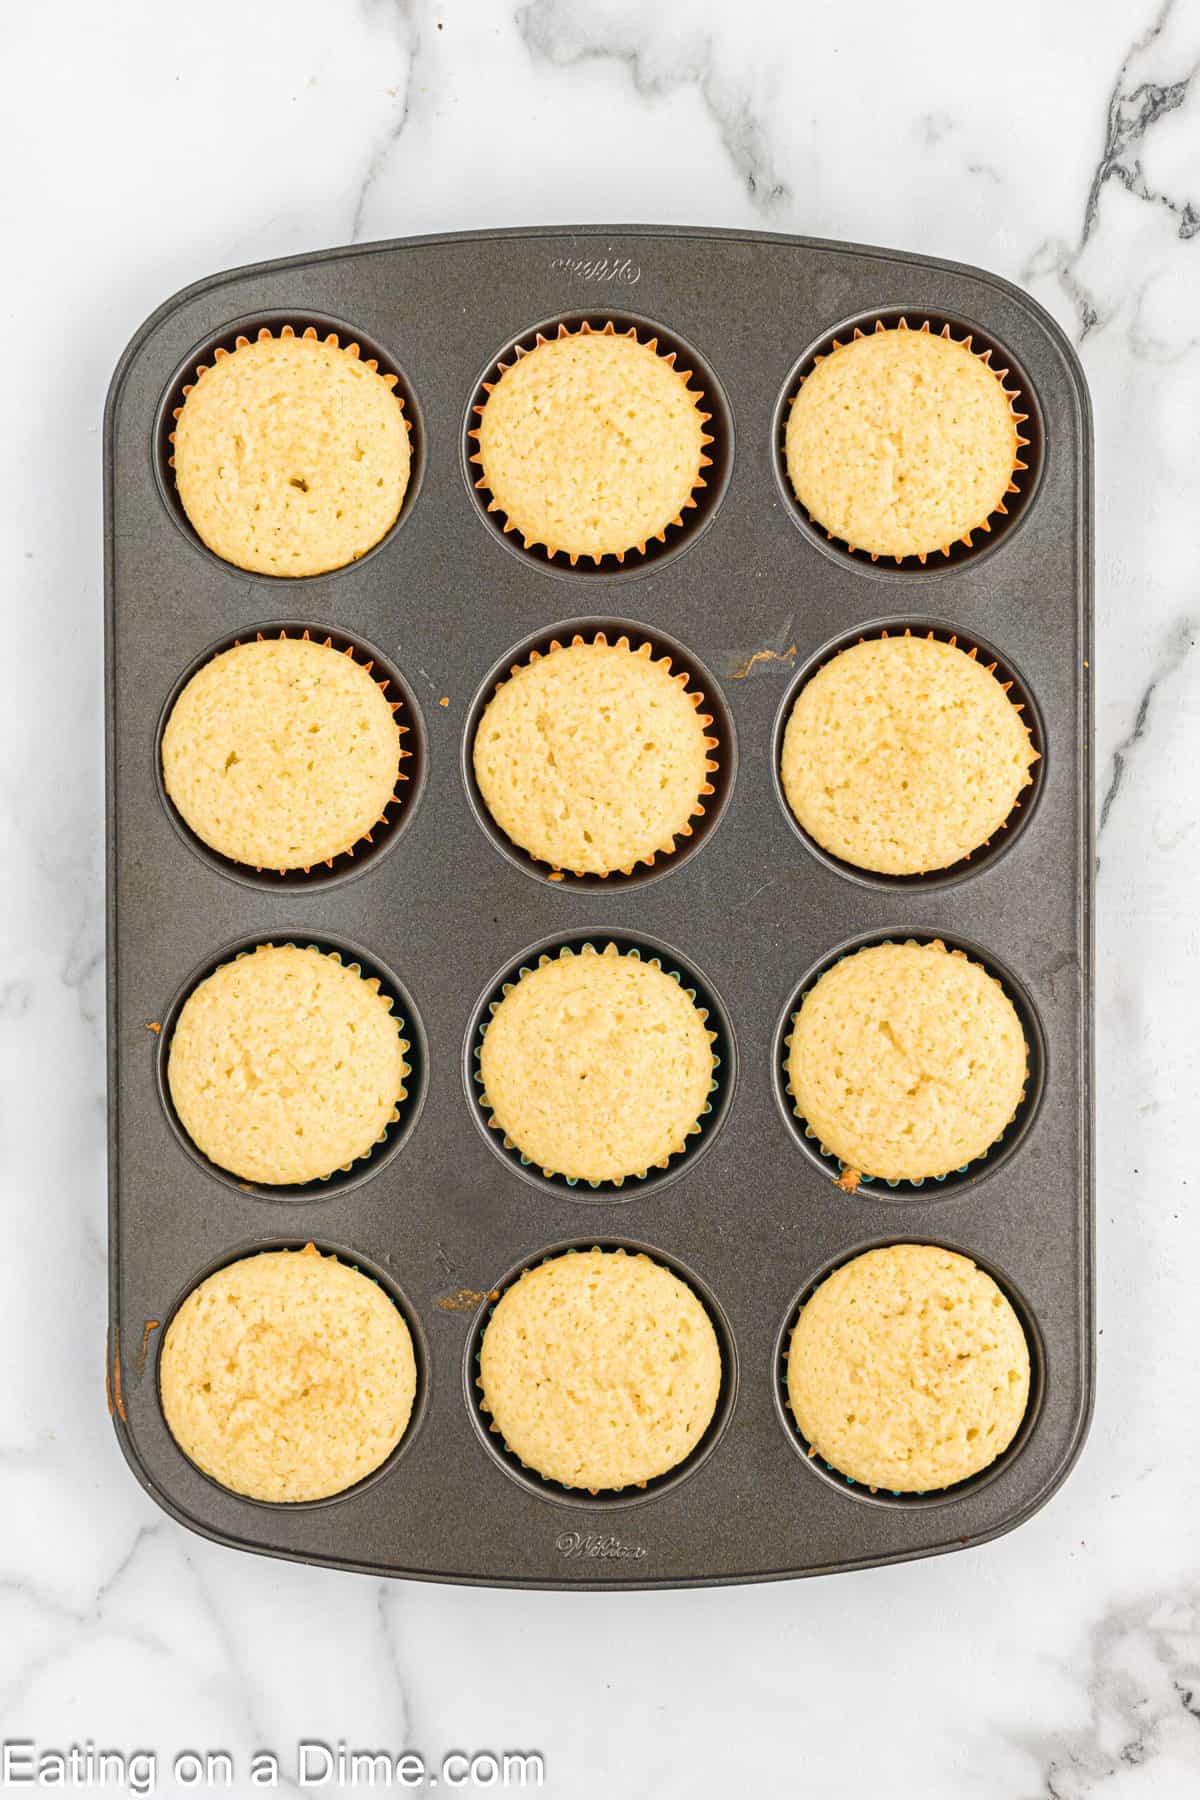 Baked cupcakes in a muffin tin